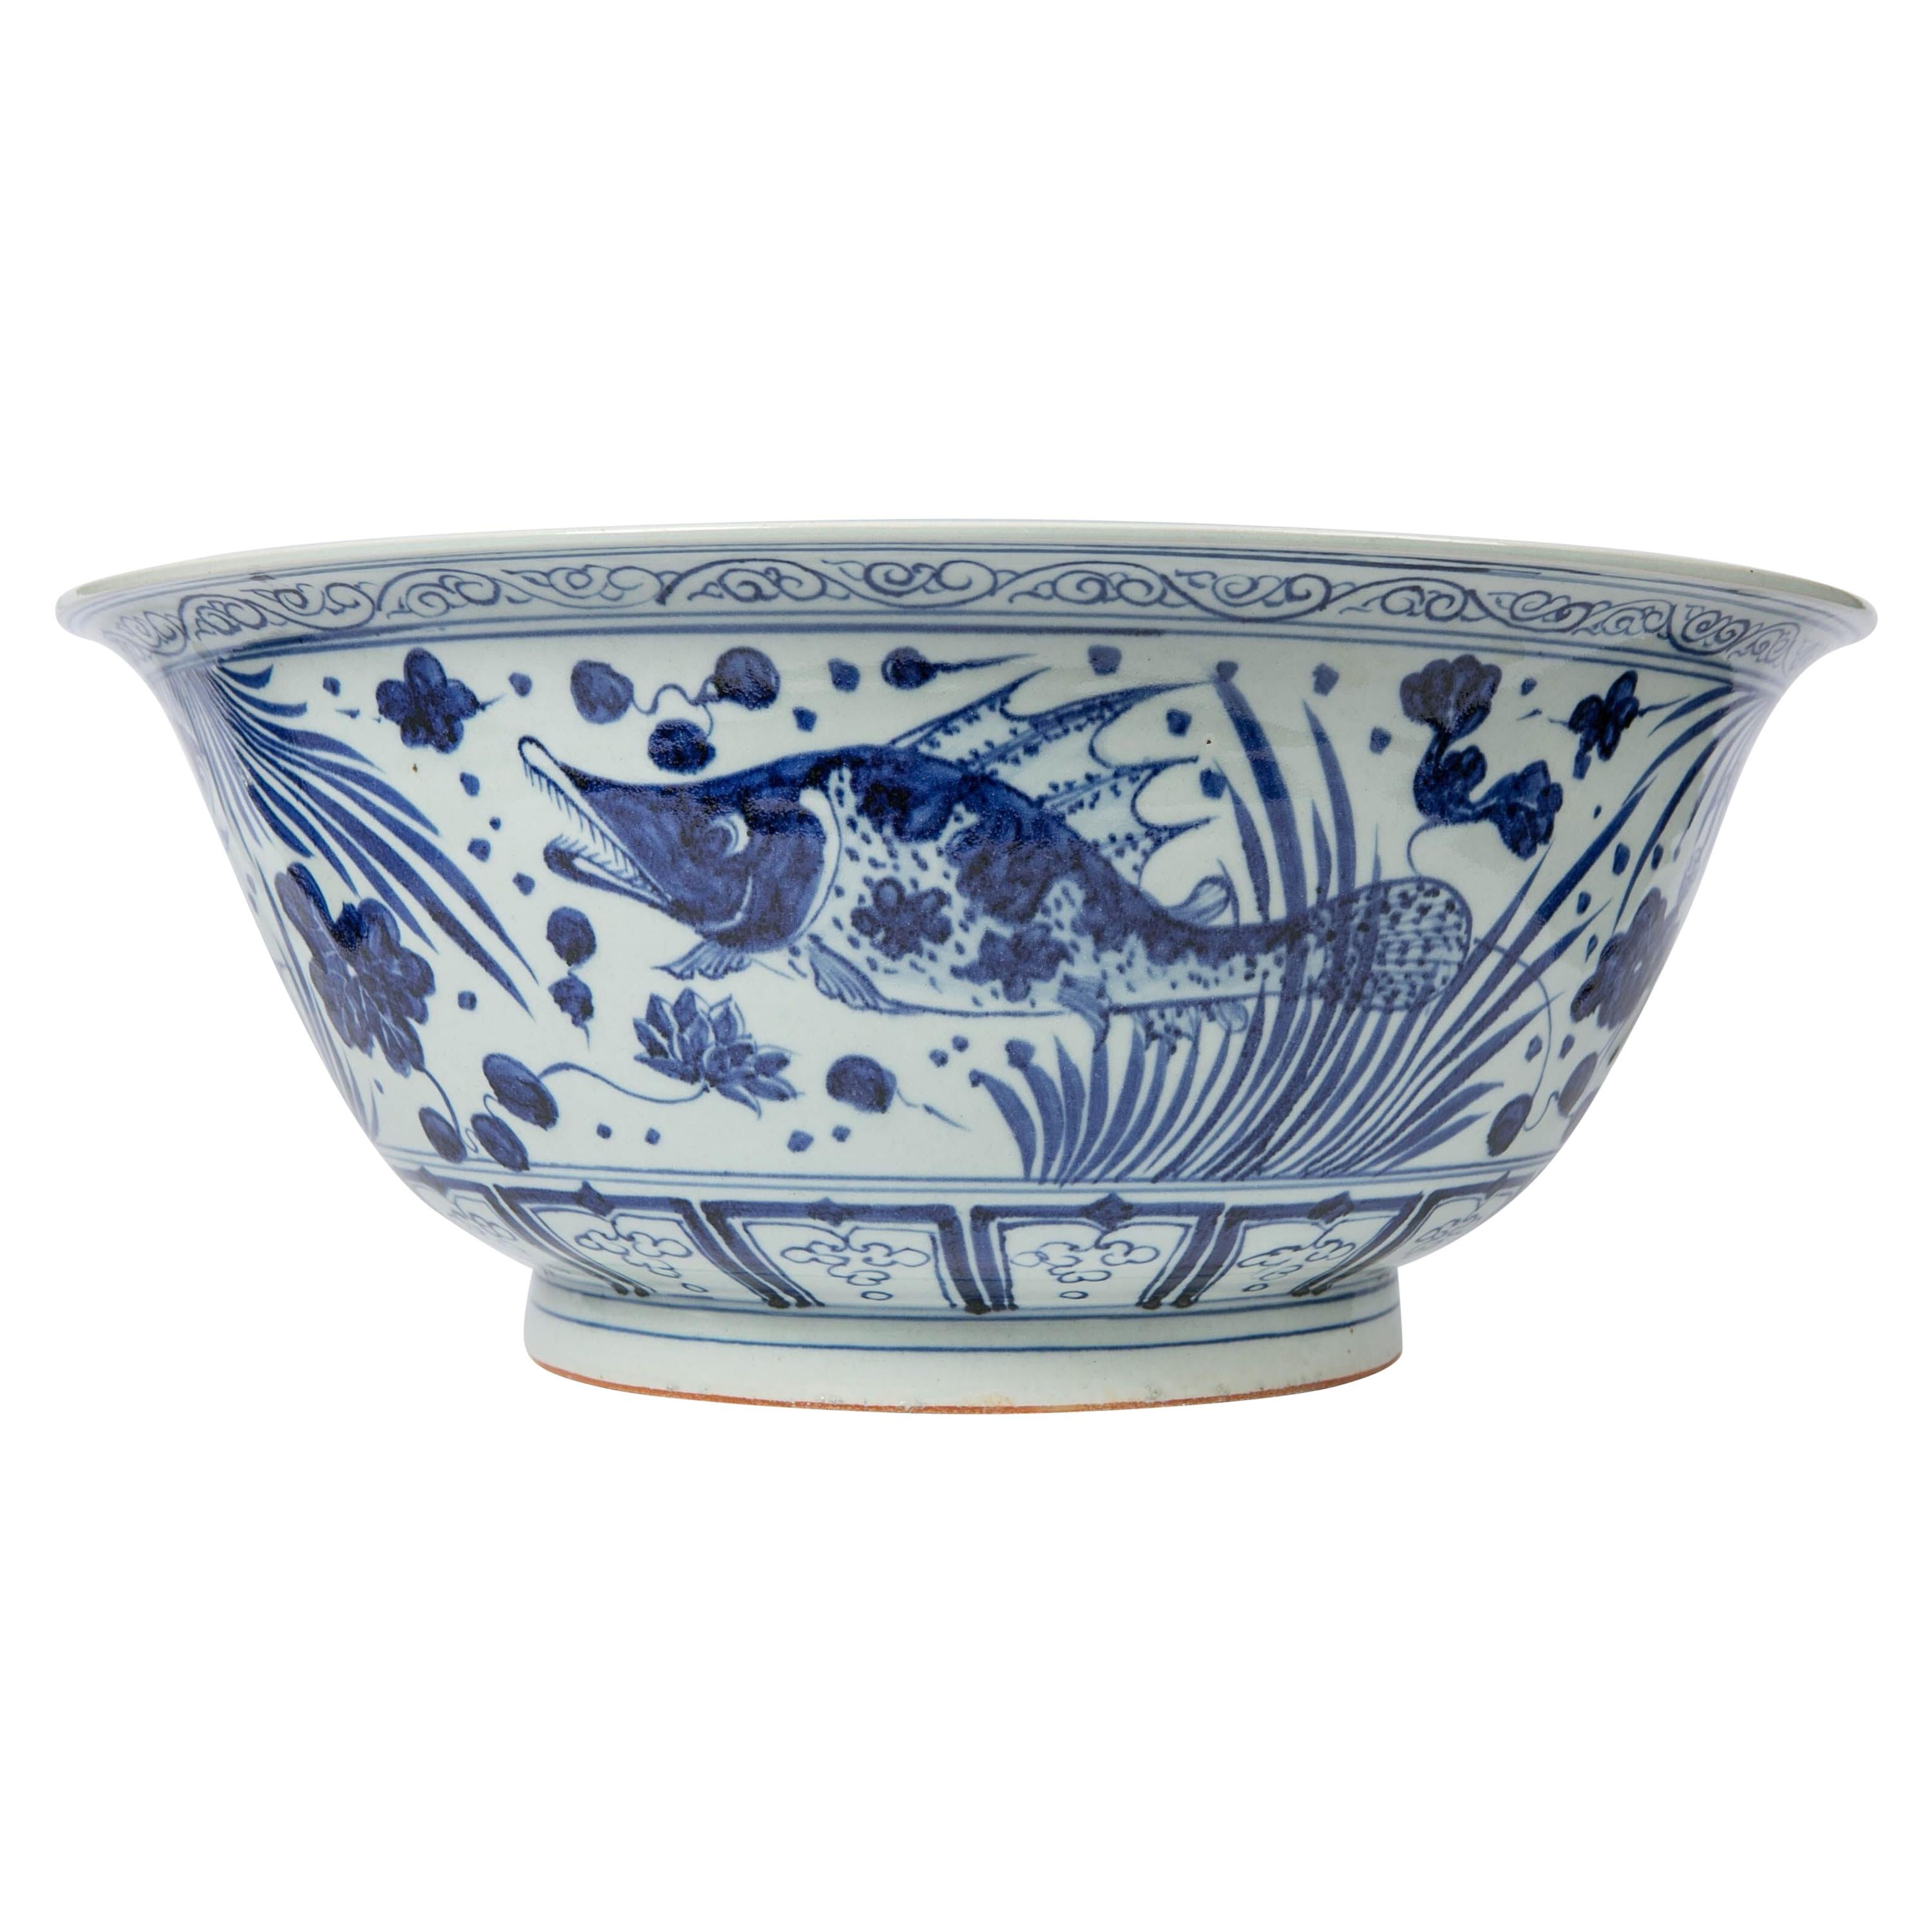 Massive Chinese Blue and White Punch Bowl Decorated with Fish